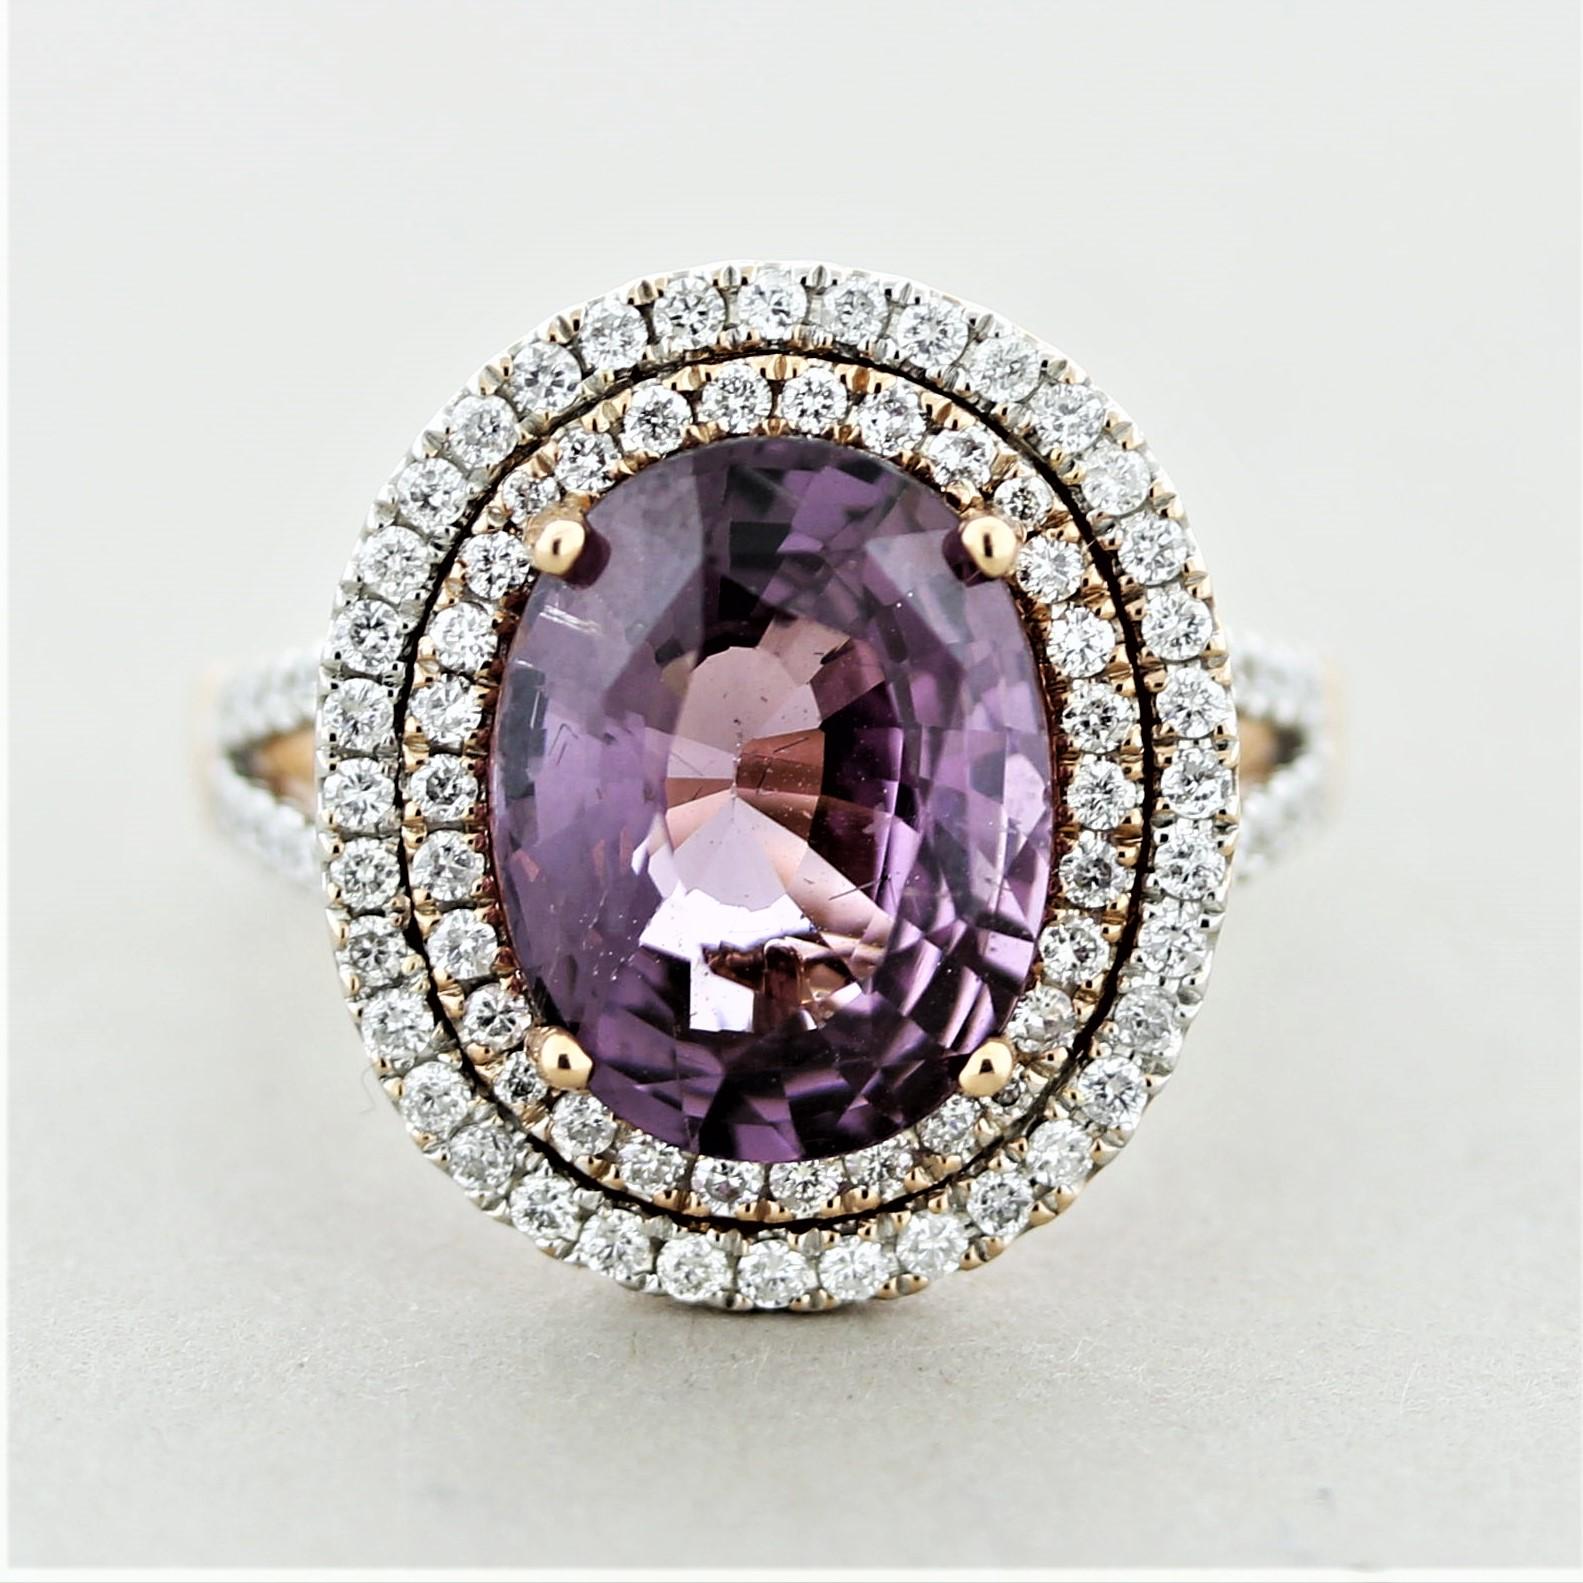 A large spinel set in an impressive ring. The spinel weighs 5.48 carats and has a lovely slightly pinkish-purple color that shines in the light. It is complemented by 0.90 carats of round brilliant-cut diamonds that form a double halo around the